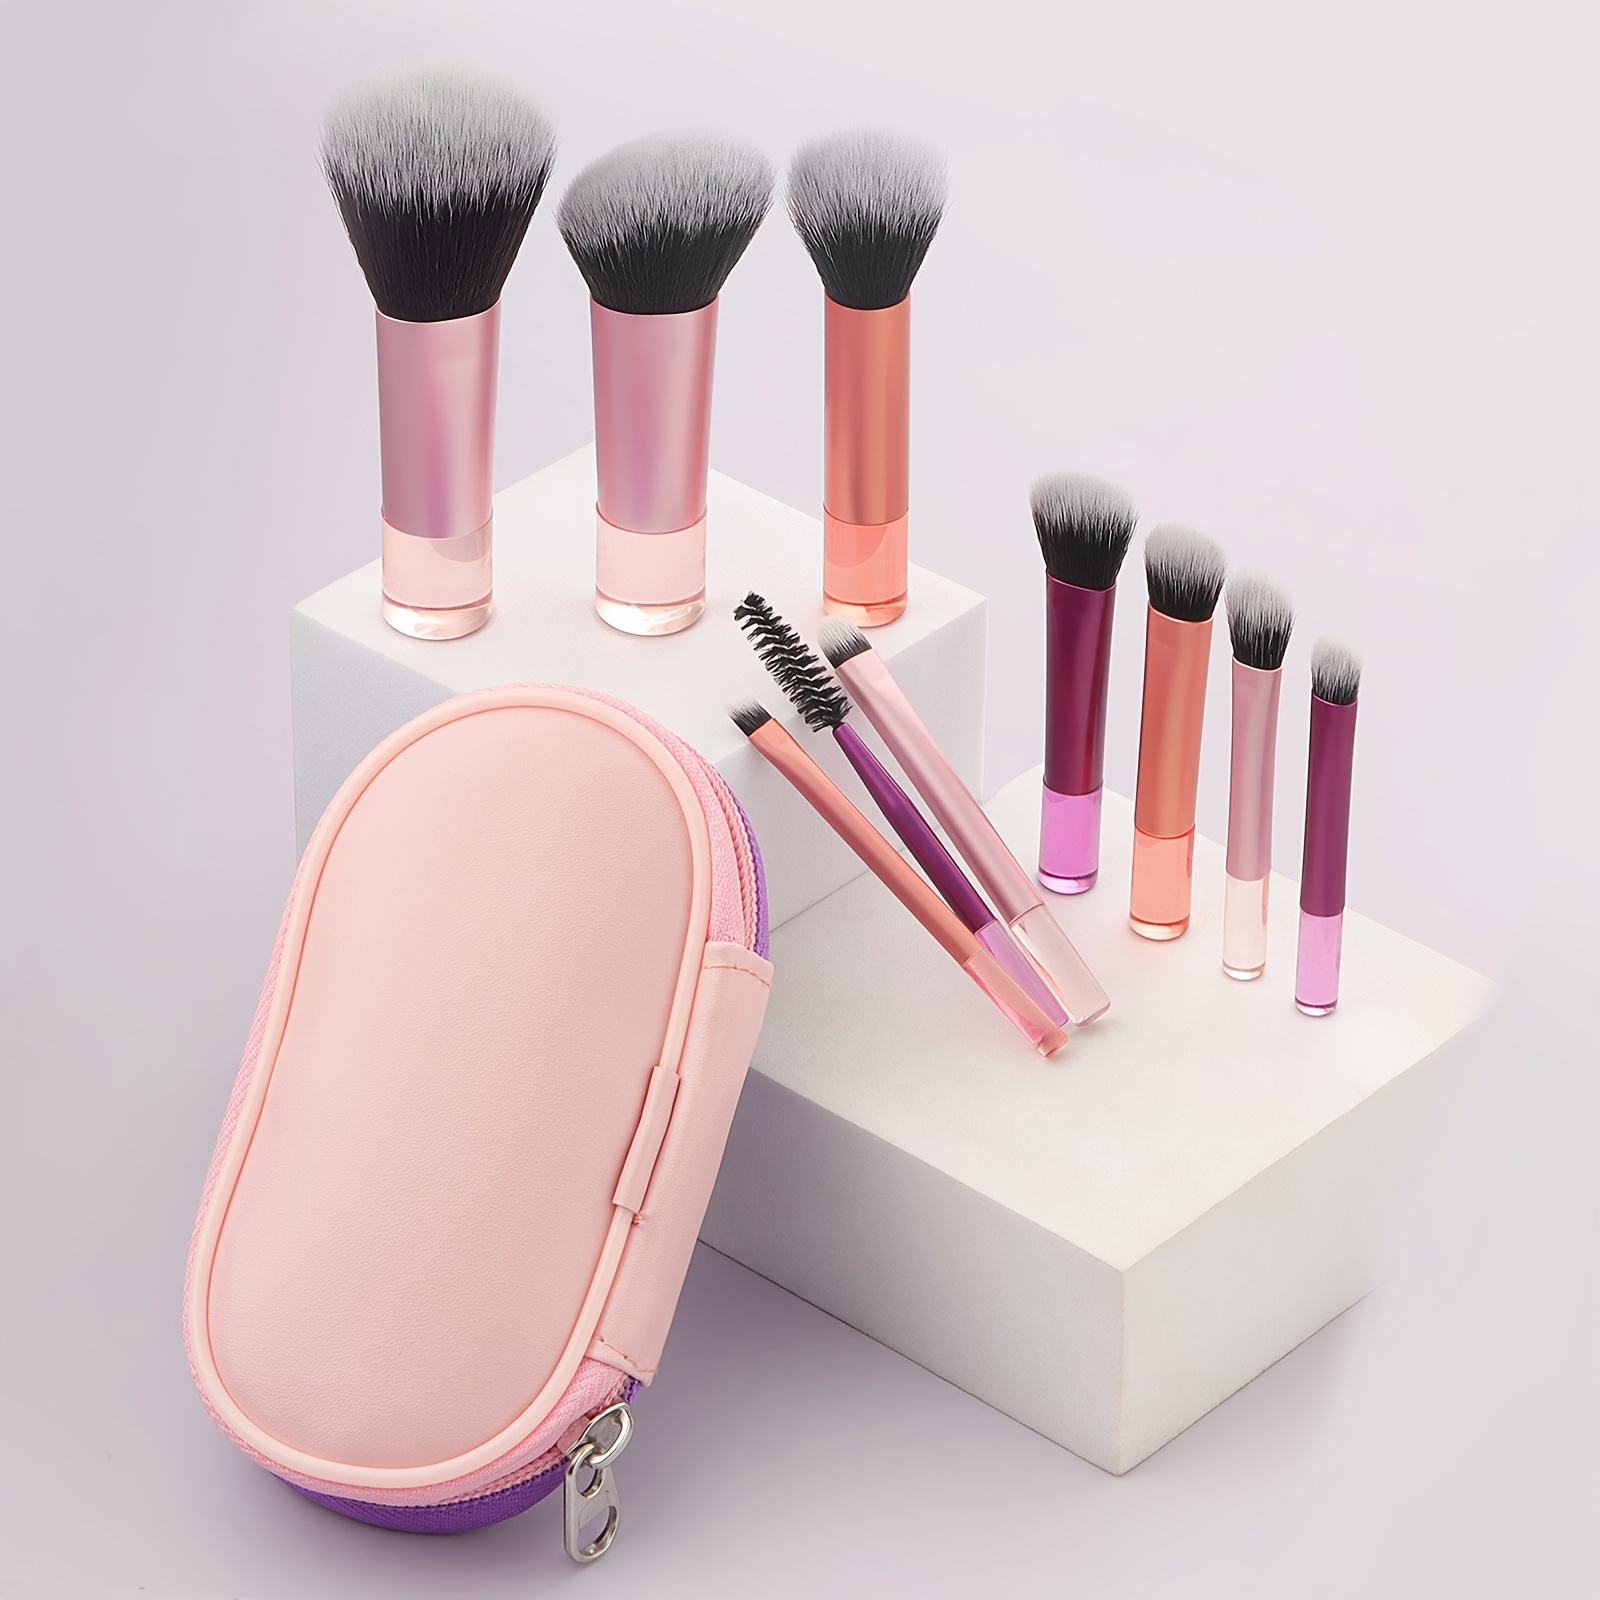 EJWQWQE 8pcs Mini Makeup Brush Set Foundation Powder Concealers Eye Shadows  Blush Cosmetic Brushes With Storage Bag Small Size Portable For Home Office  Travel Outdoor 